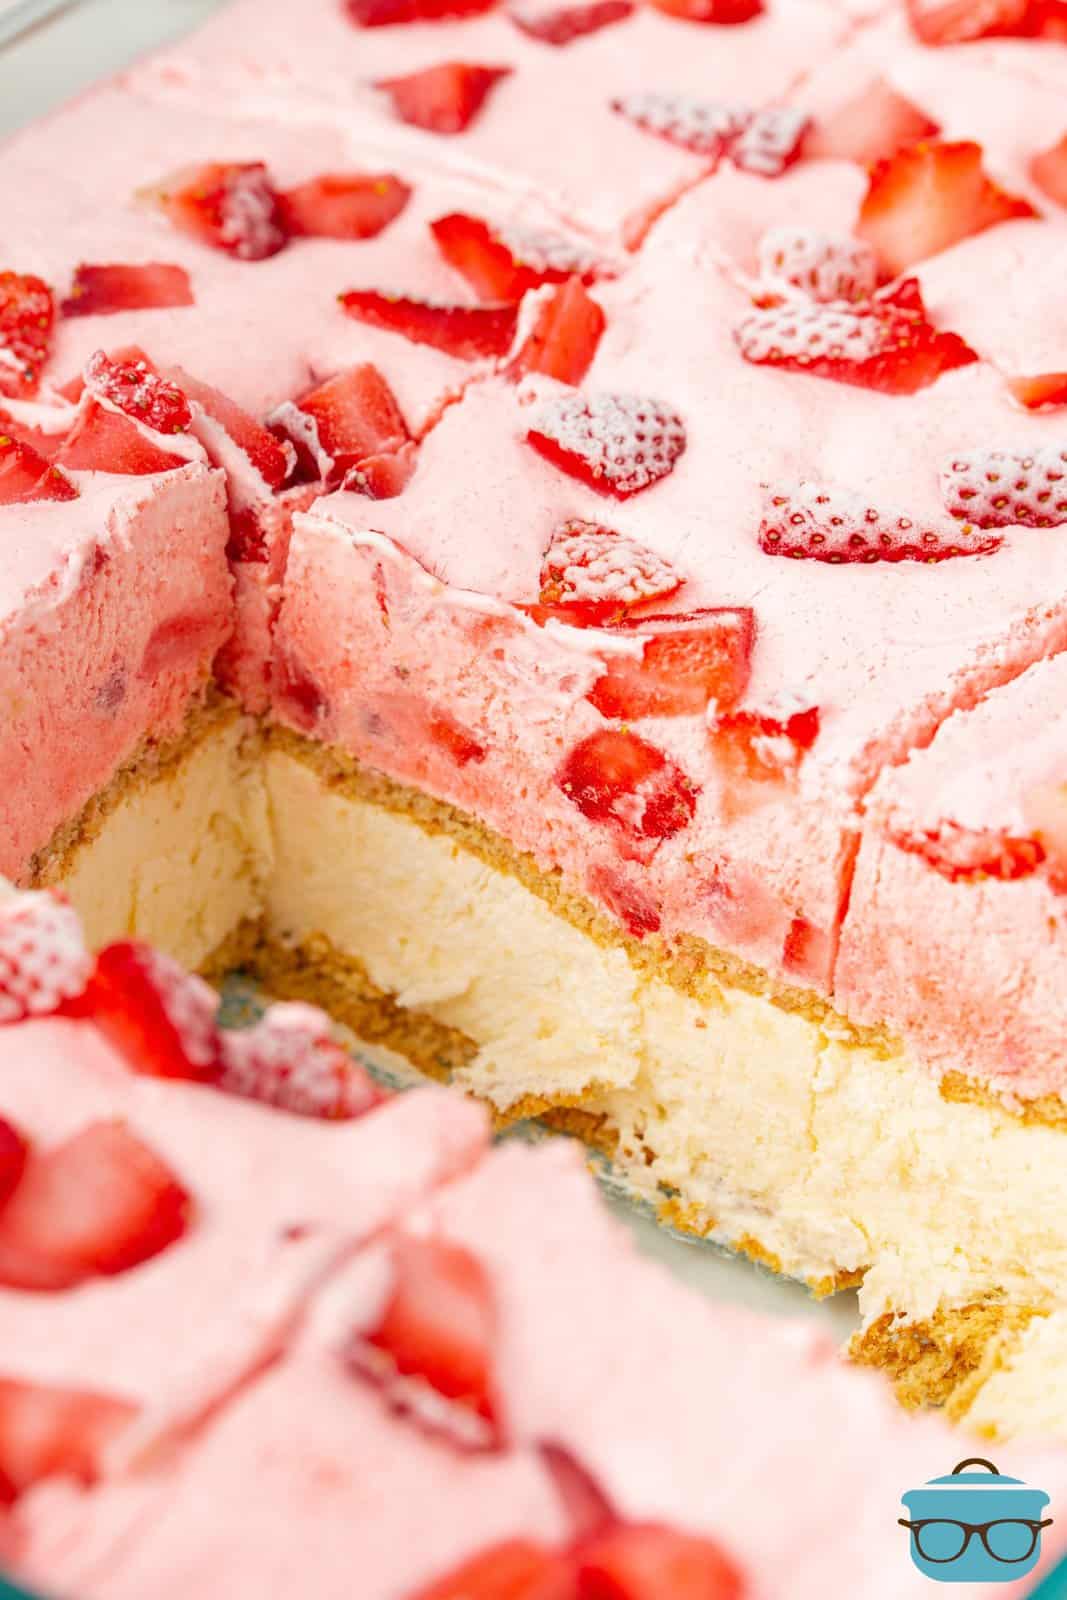 Cut slices of Strawberry Ice Box Cake removed from pan showing layers.